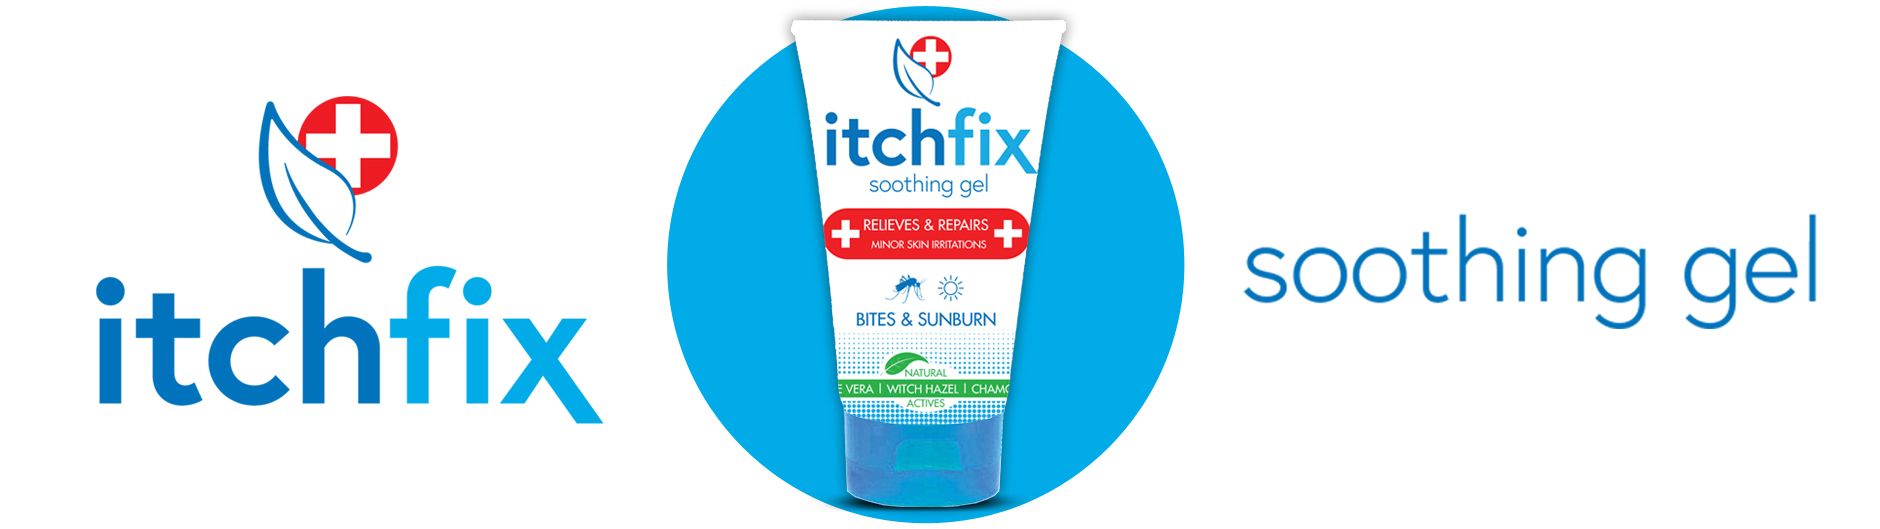 ItchFix soothing gel product